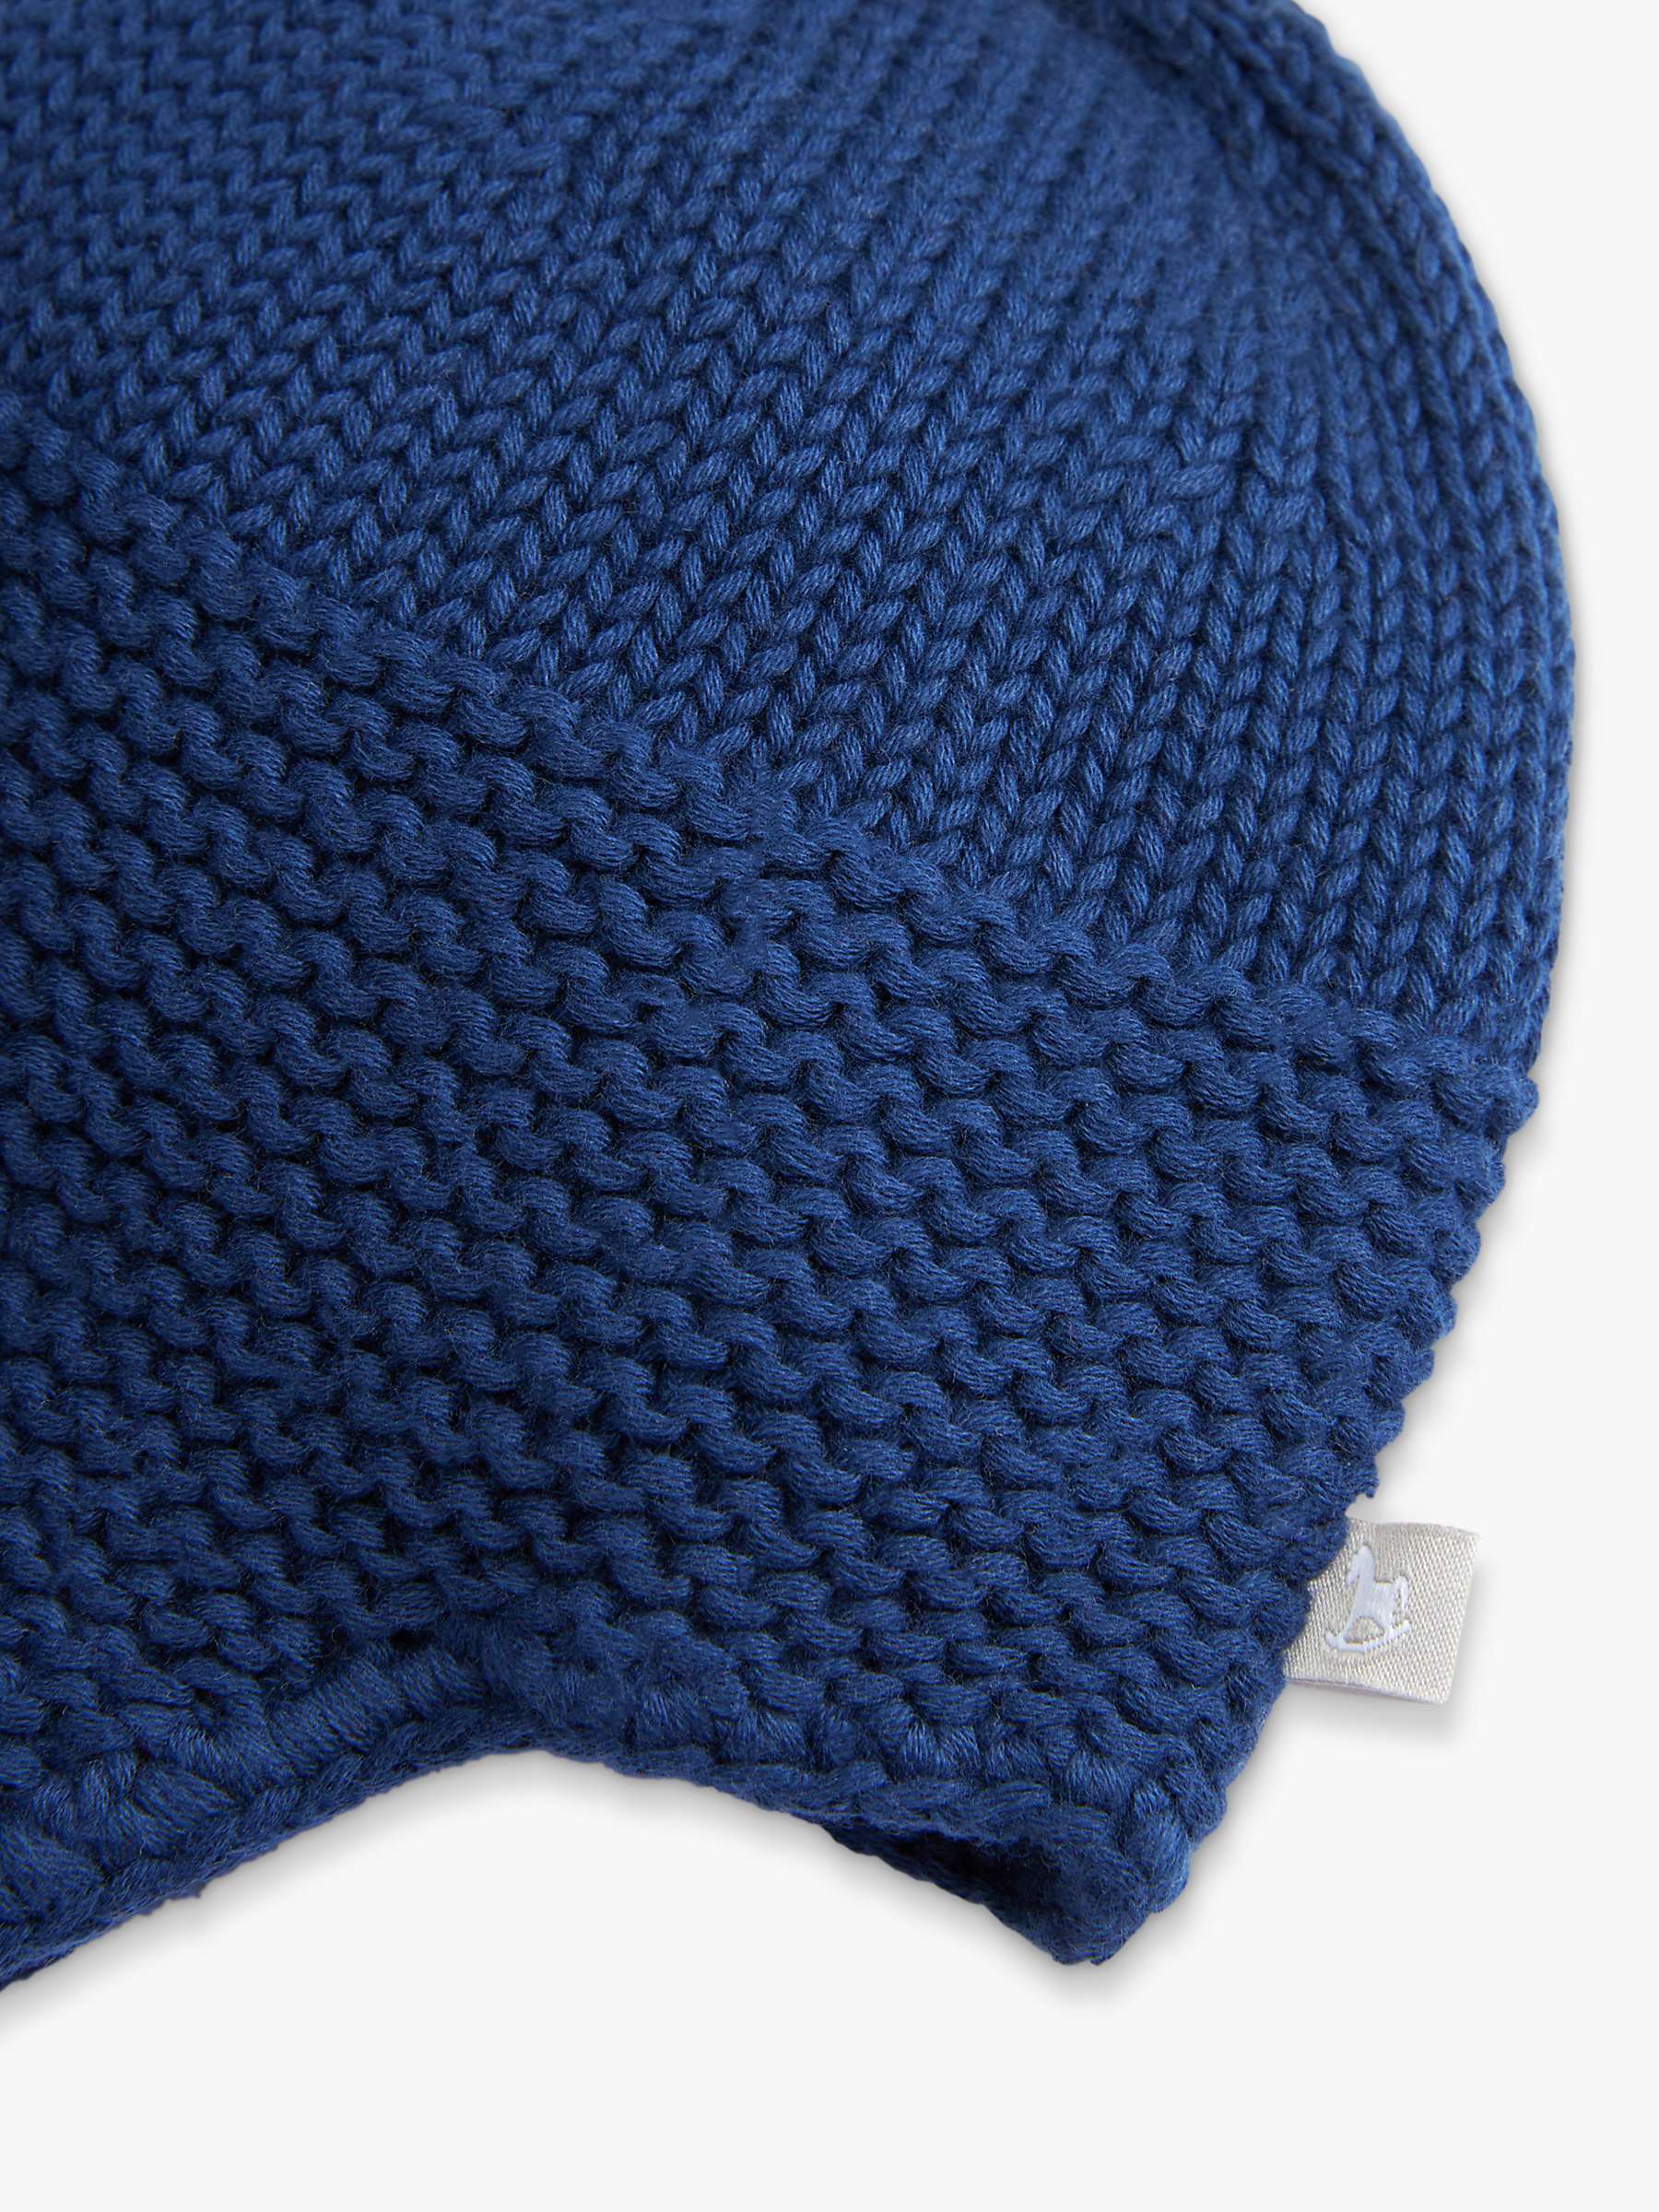 Buy The Little Tailor Baby Trapper Knit Hat Online at johnlewis.com